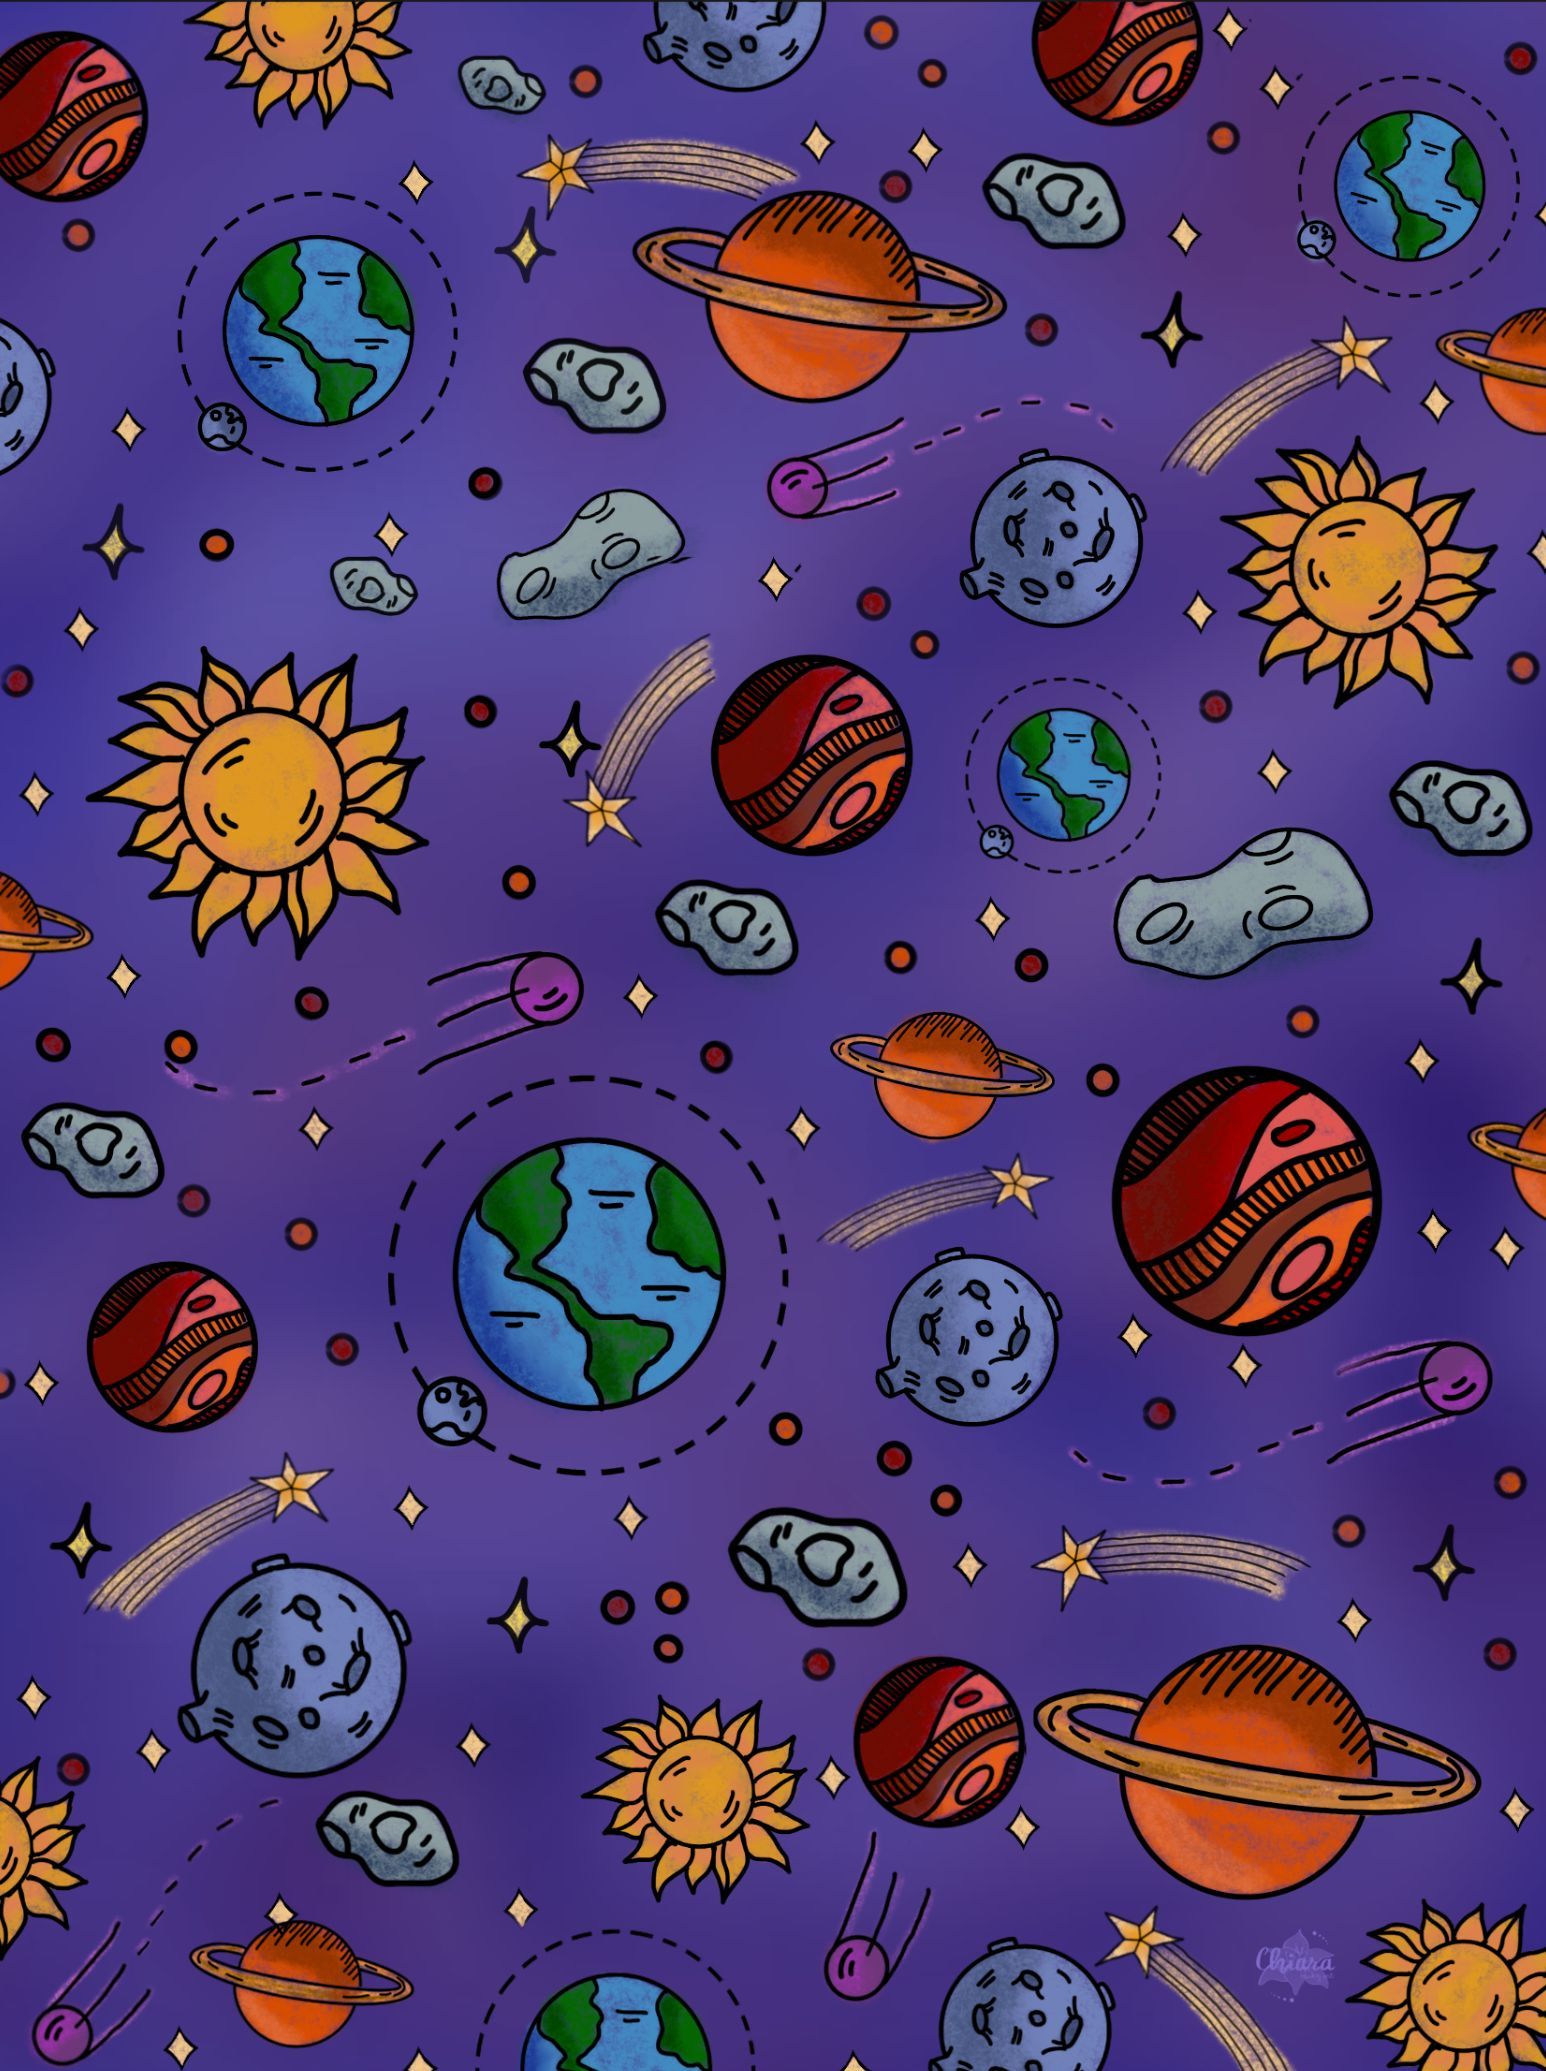 Planets and suns on a purple background - Doodles